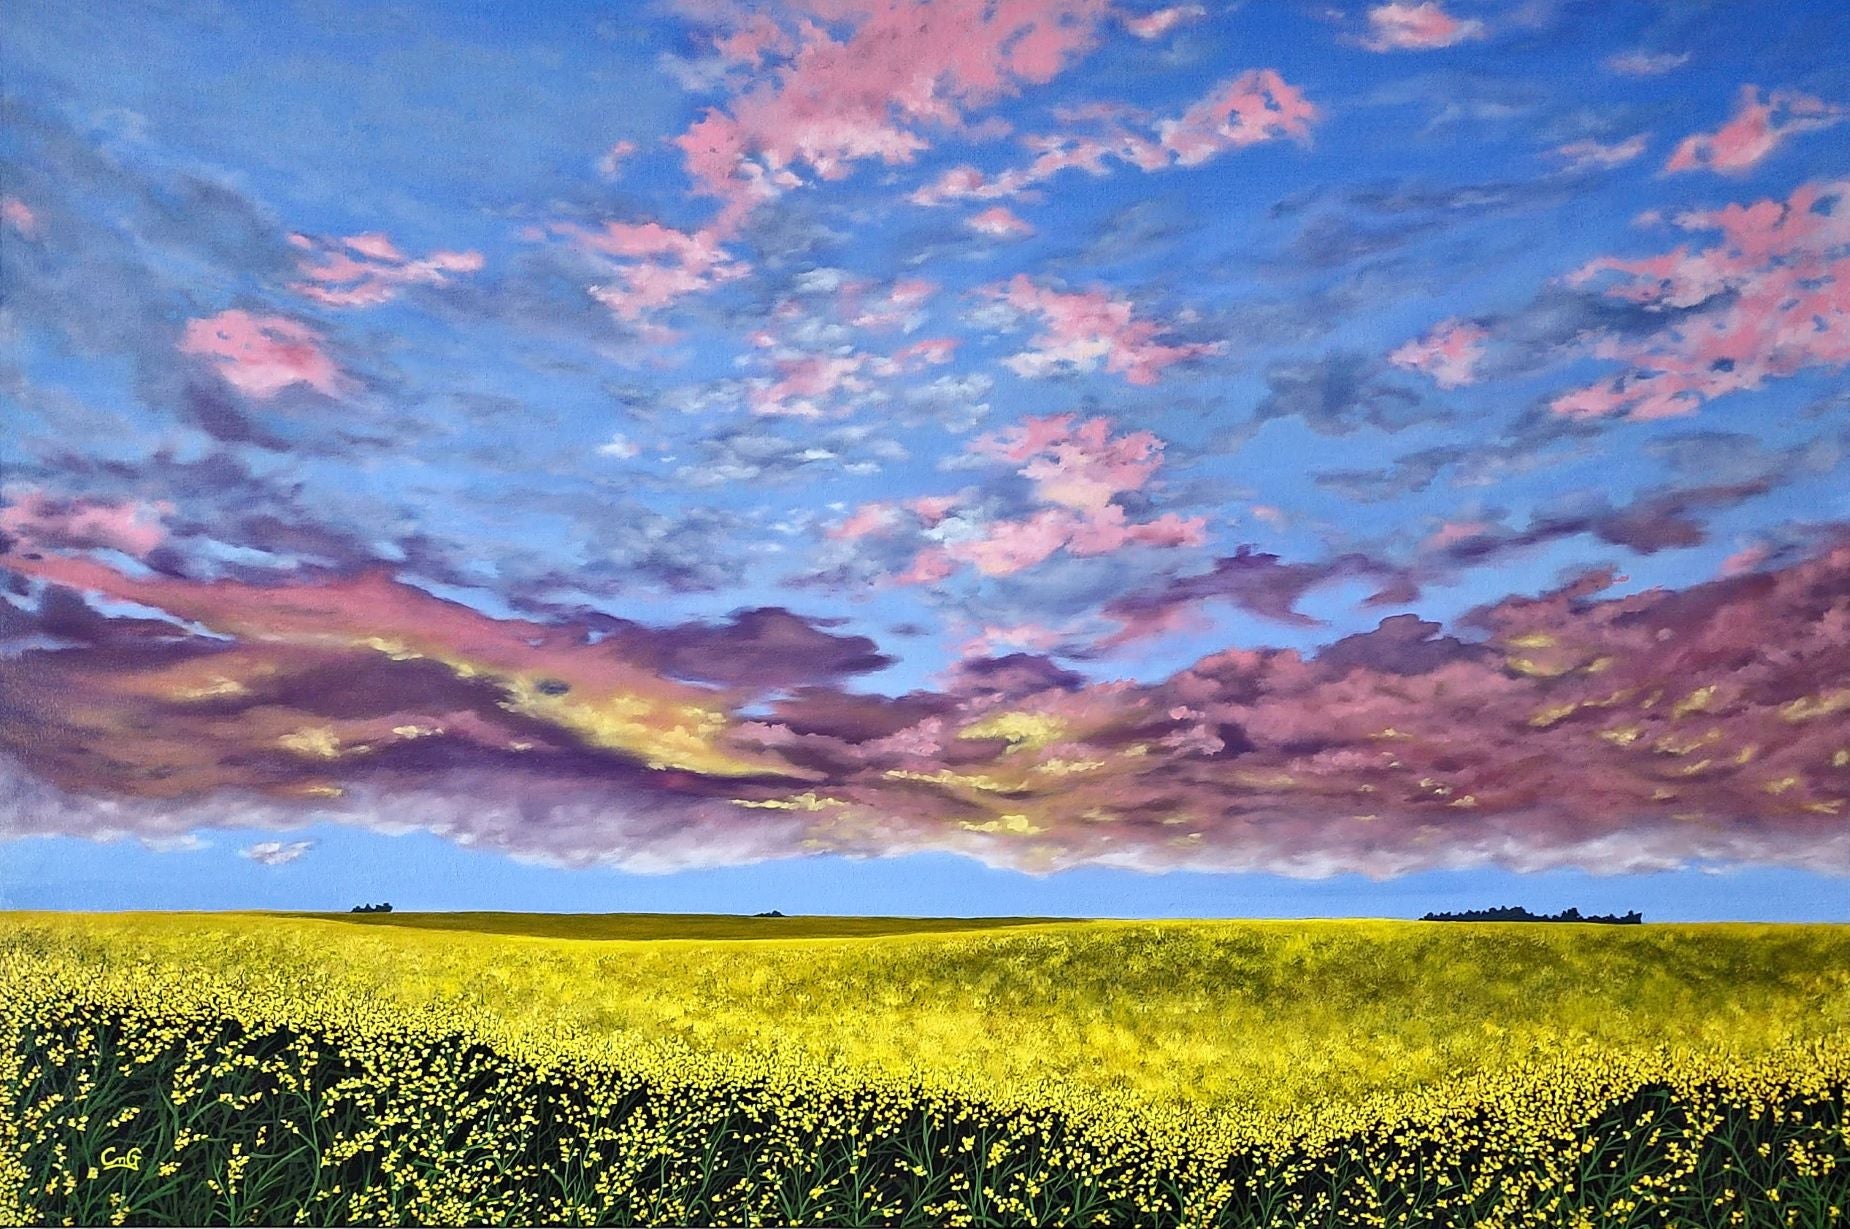 Oil on canvas landscape painting of a pink purple and yellow sunrise over a bright yellow canola field